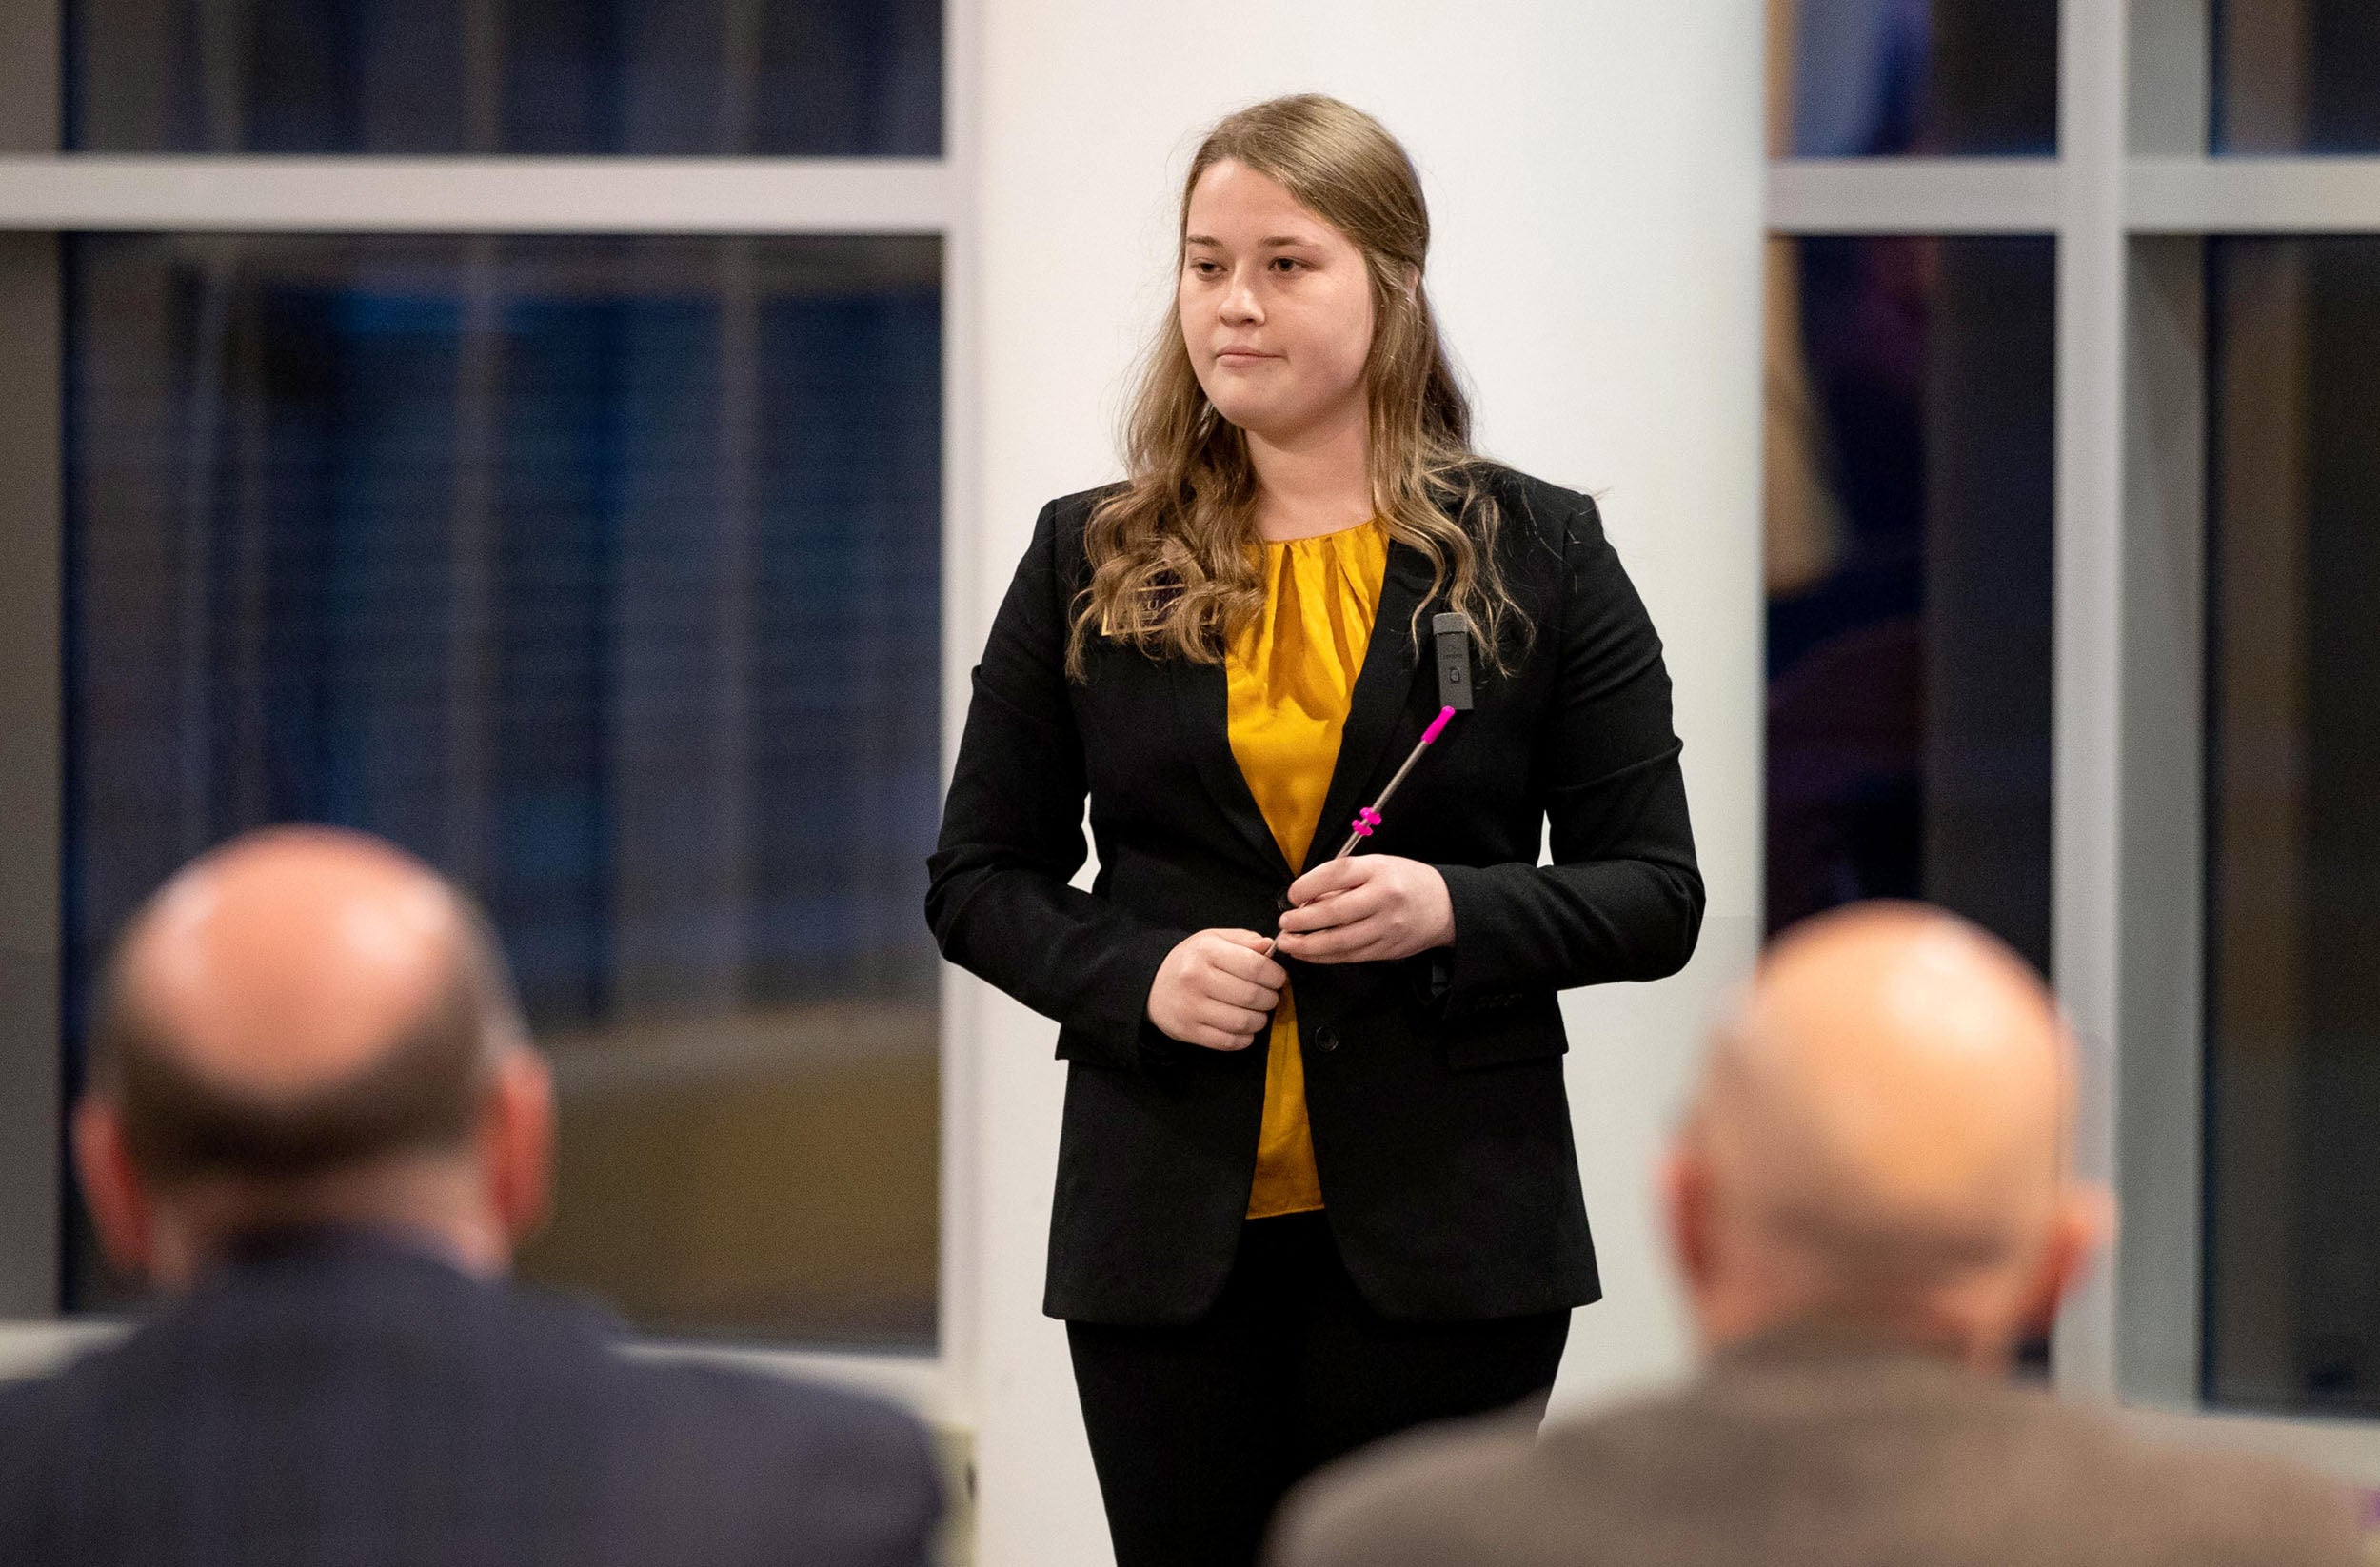 Freshman Grace Krell of SweetSip took home second place and $10,000 after competing in the final round of the Pirate Entrepreneurship Challenge. 